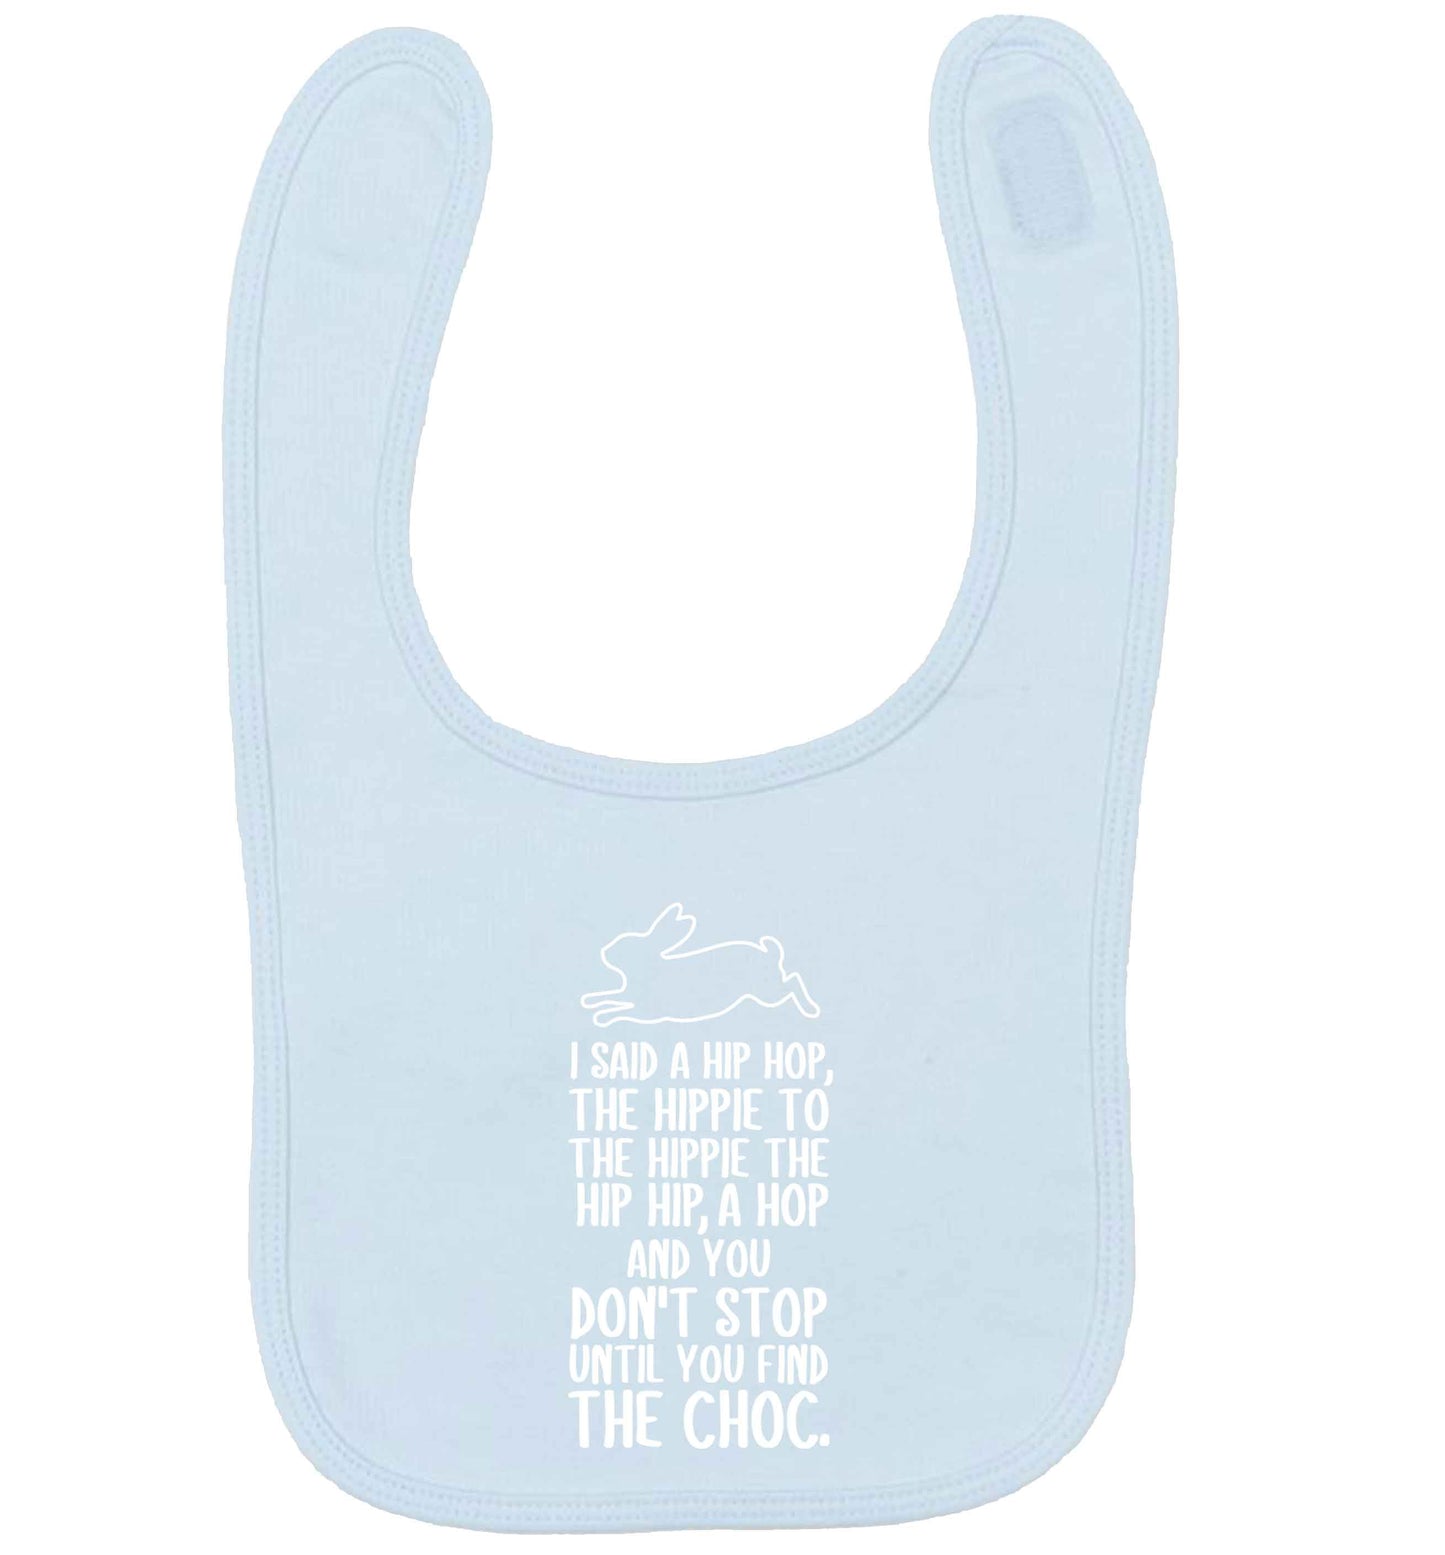 Don't stop until you find the choc pale blue baby bib